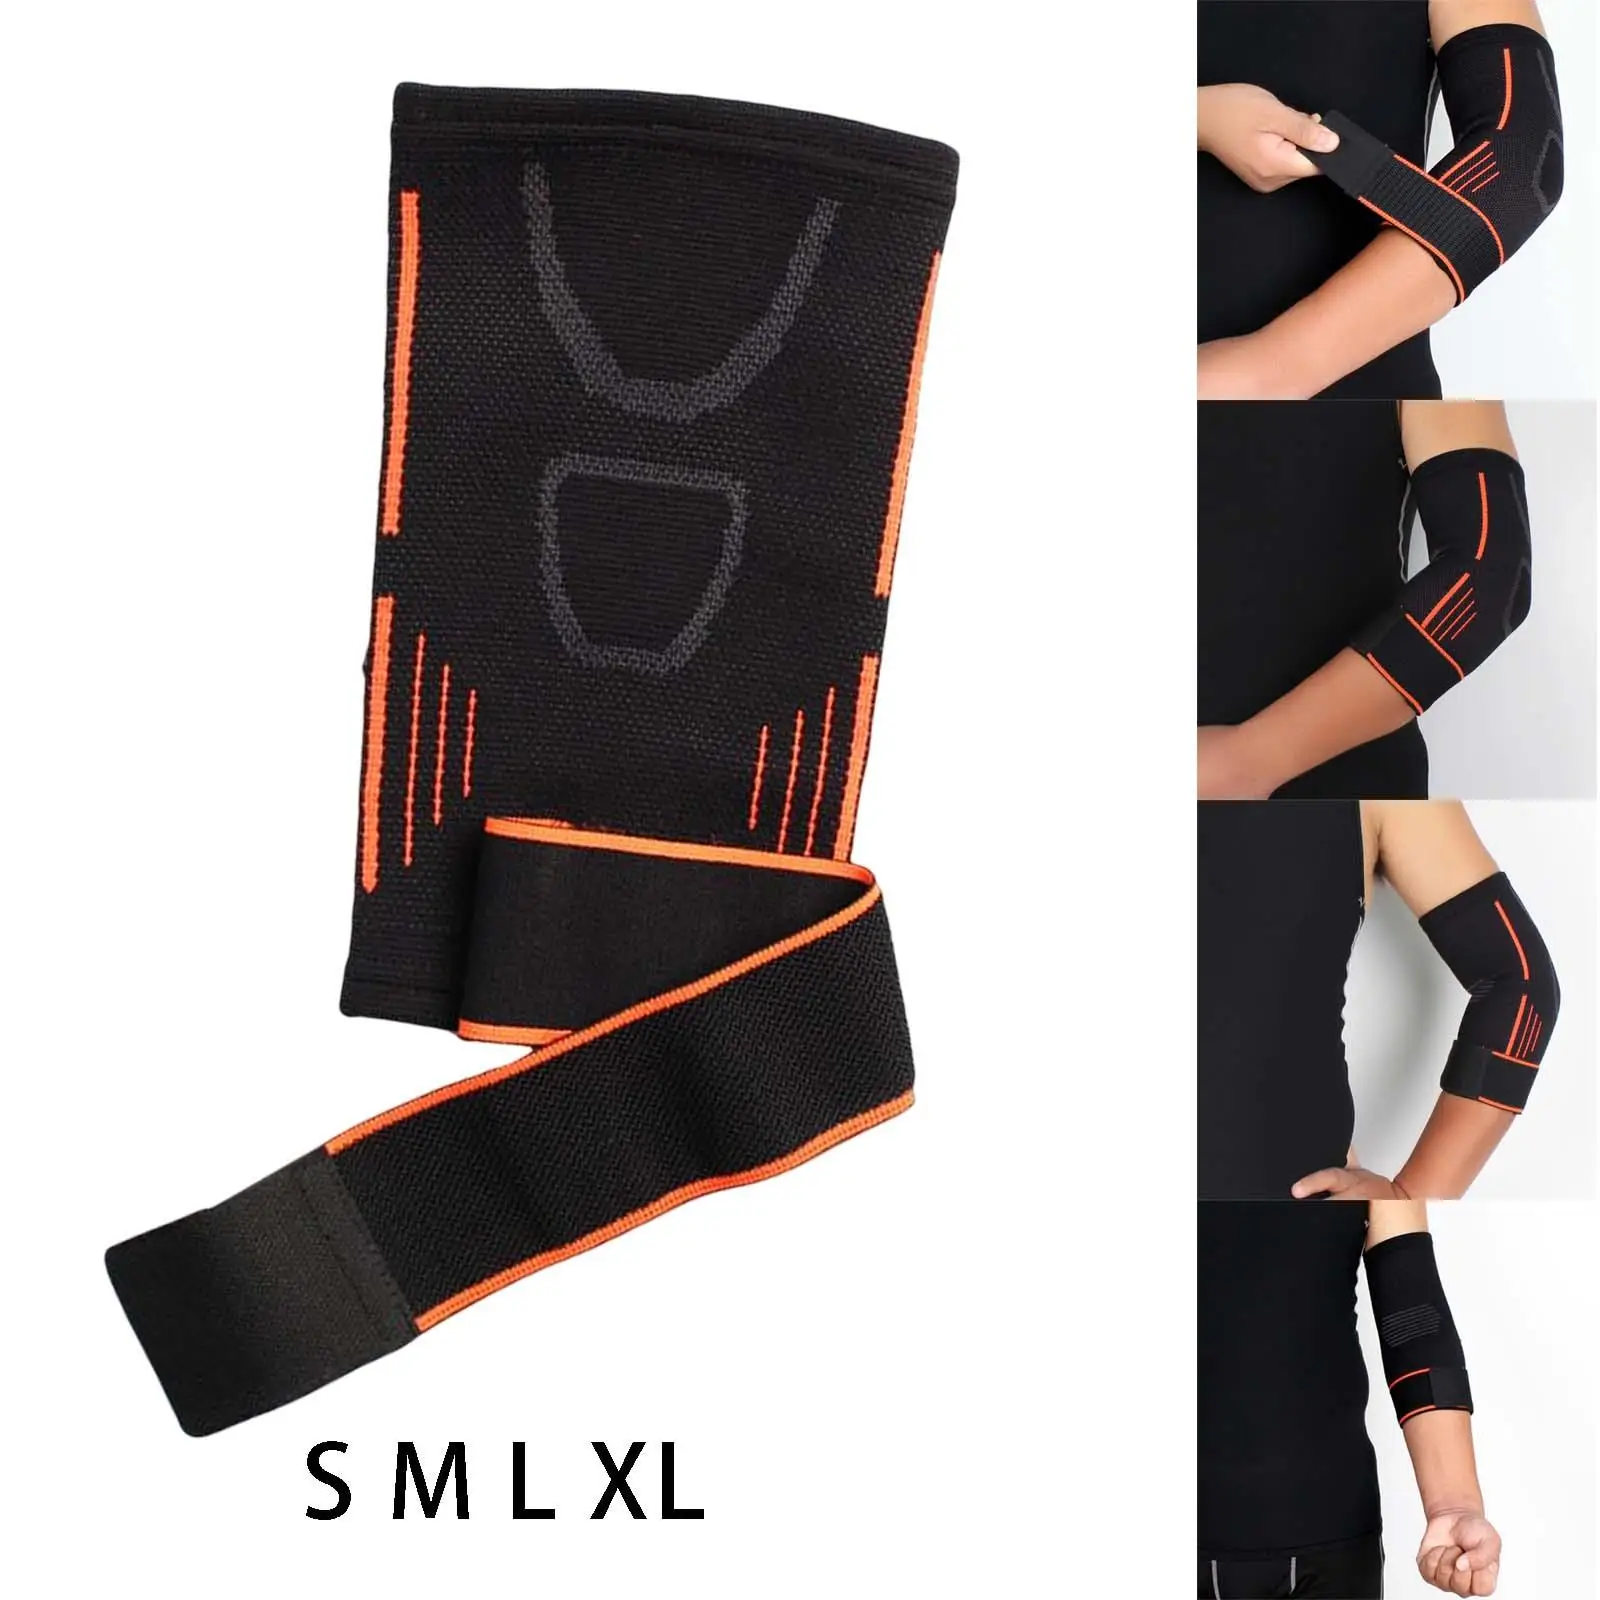 Compression Sleeve Arms Support Wrap Sports Protection Forearm Crashproof Elbow Brace Gym, Sport Tennis Football Baseball